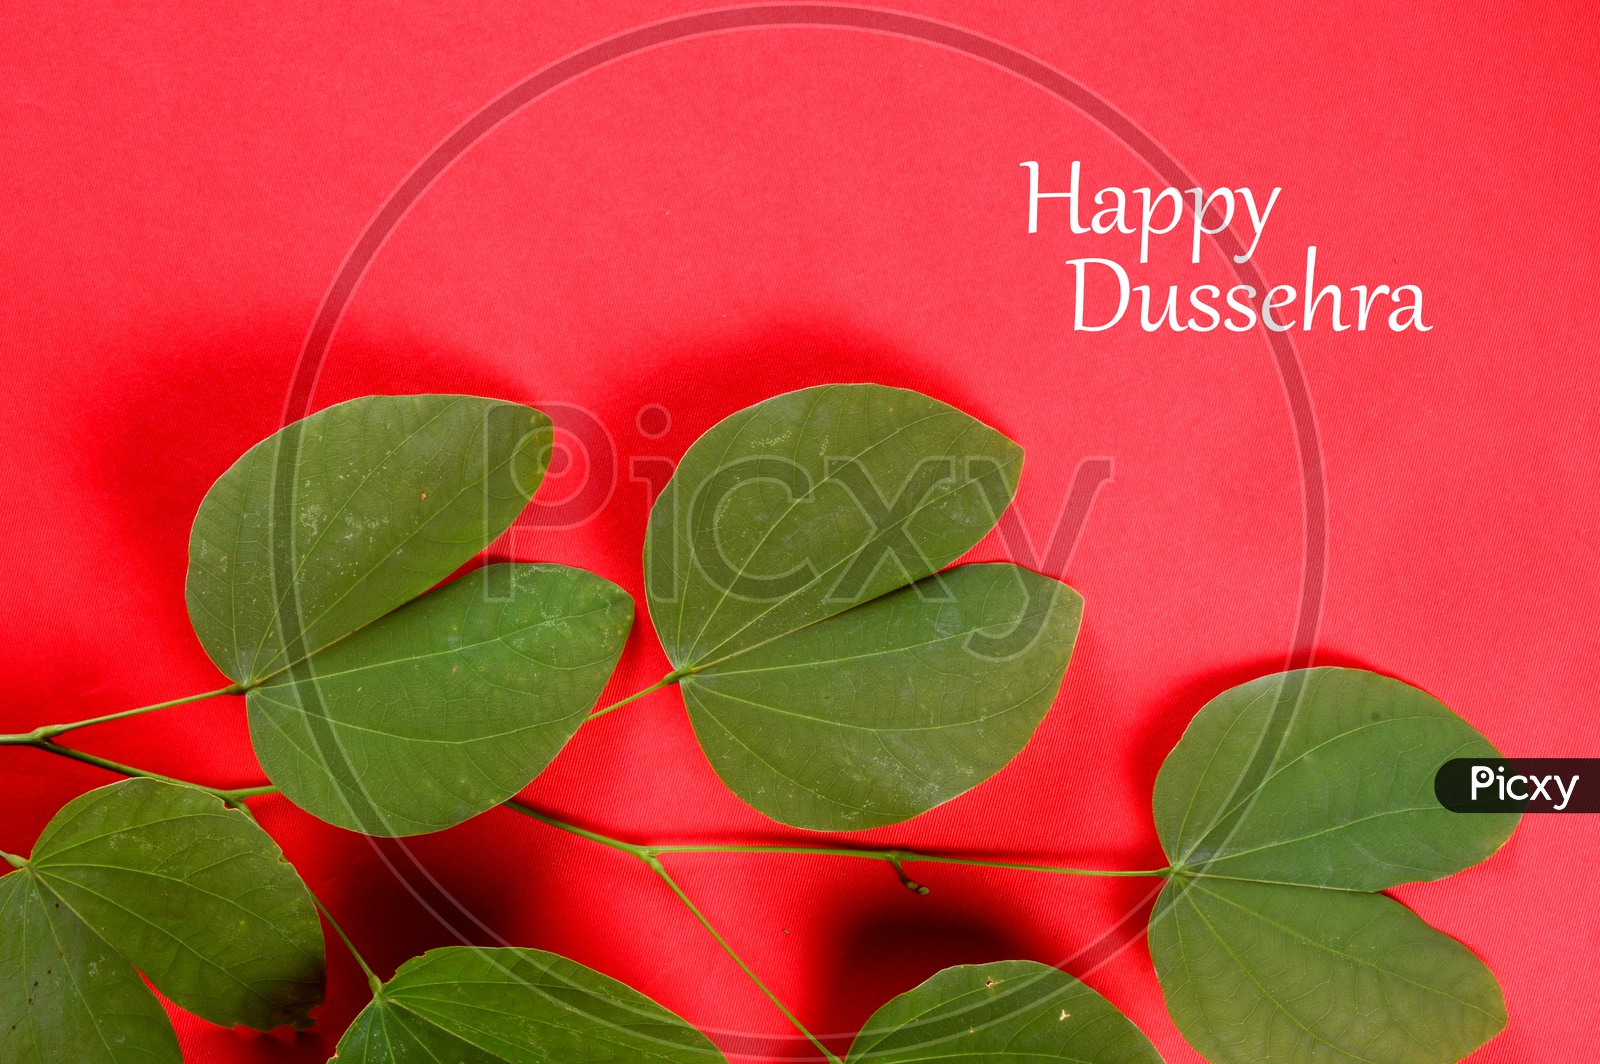 Piliostigma Racemosum Leafs On An Isolated Red Background For Dussera Festival Wishes Templates